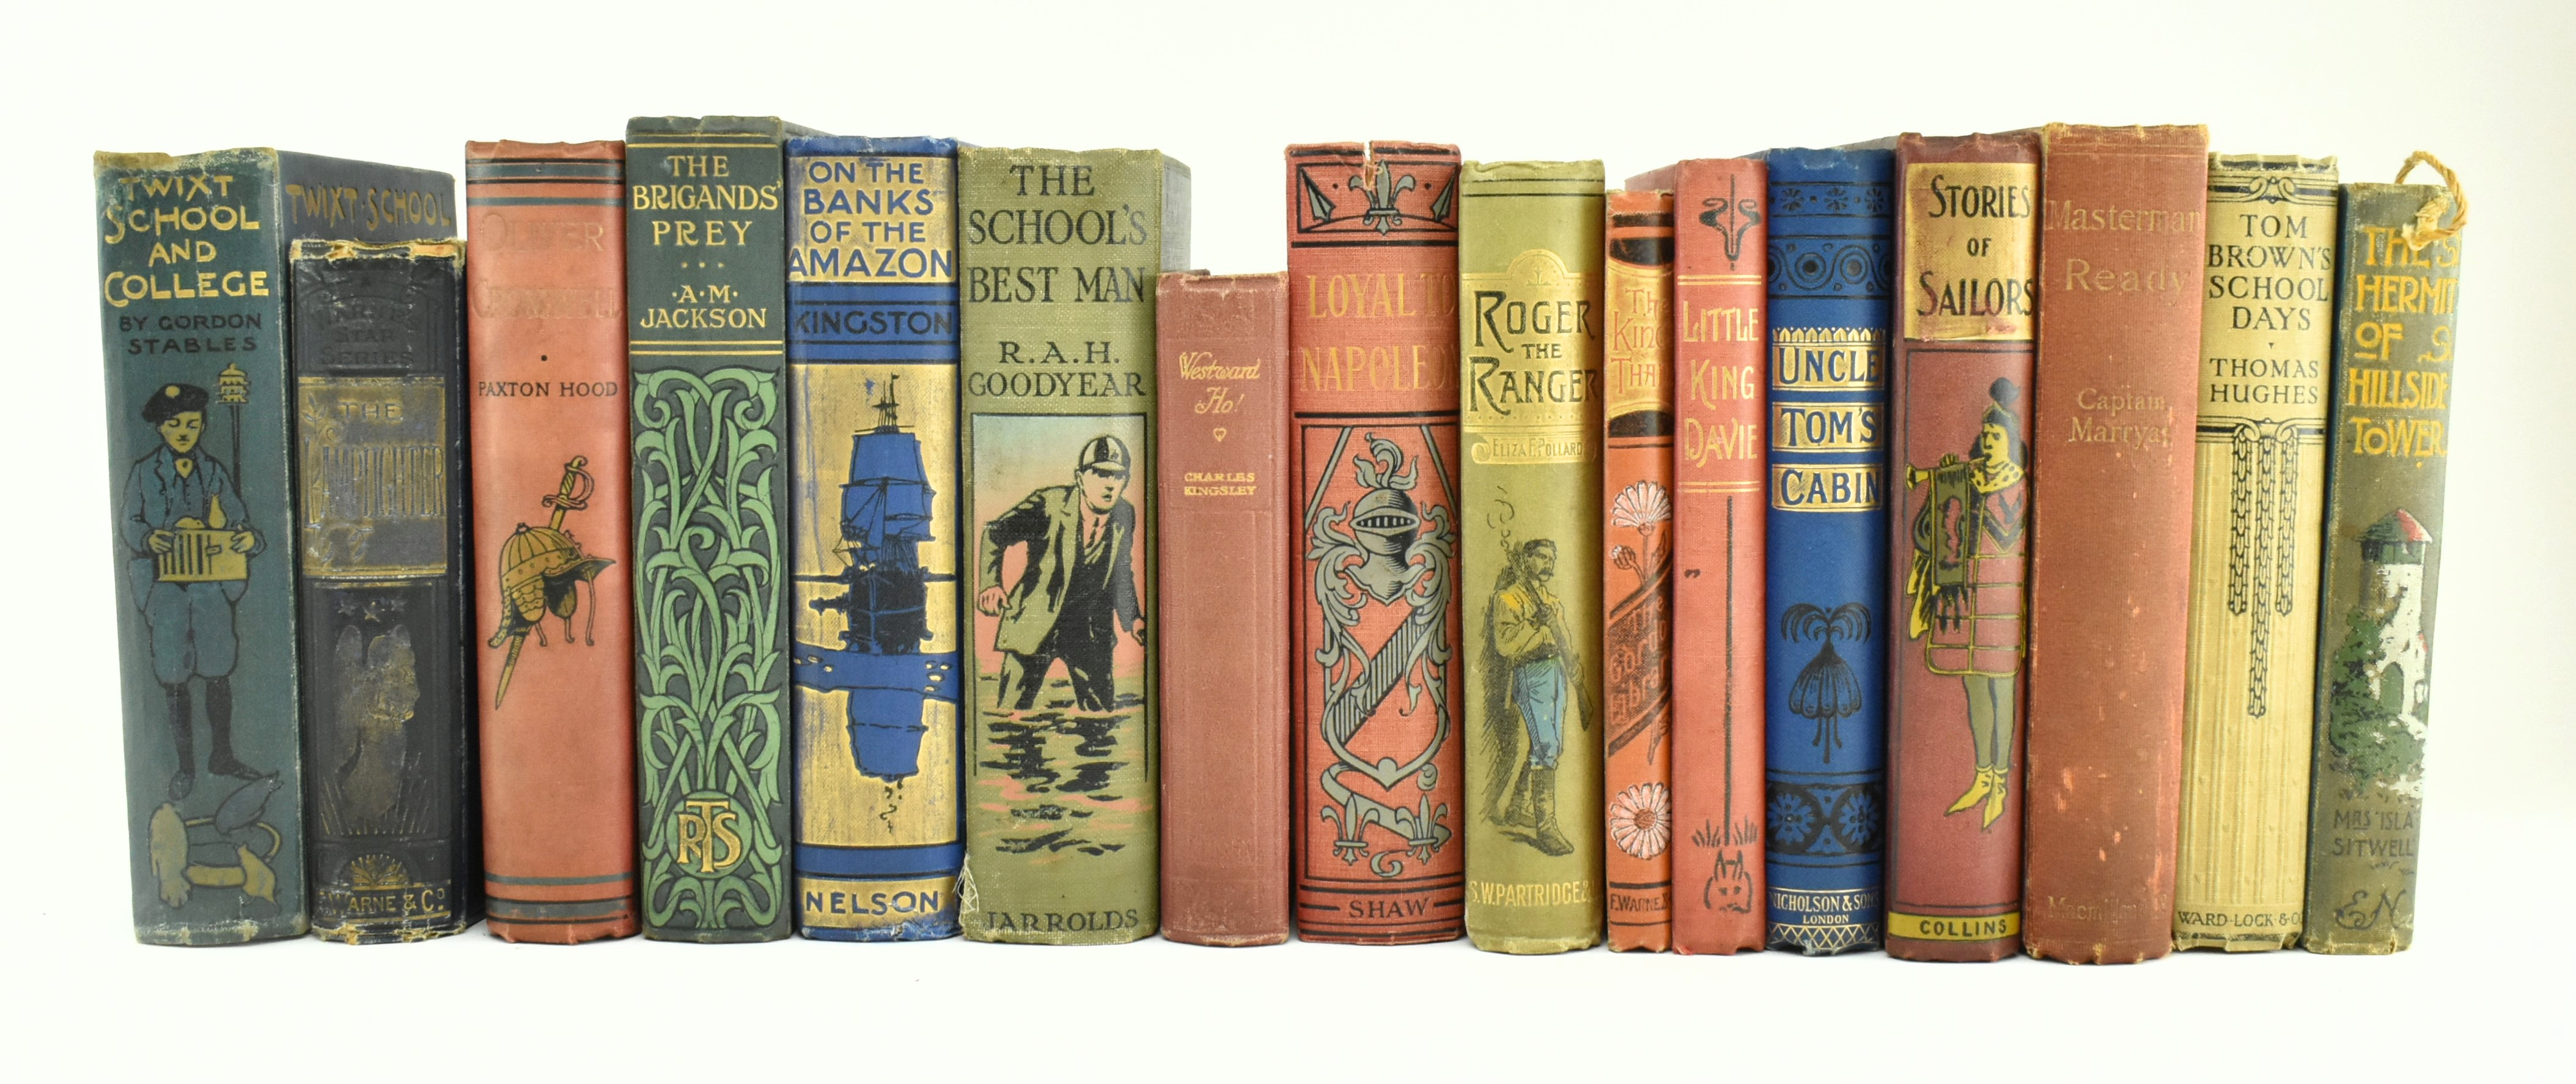 COLLECTION OF VICTORIAN & EDWARDIAN DECORATIVE CLOTH BOOKS